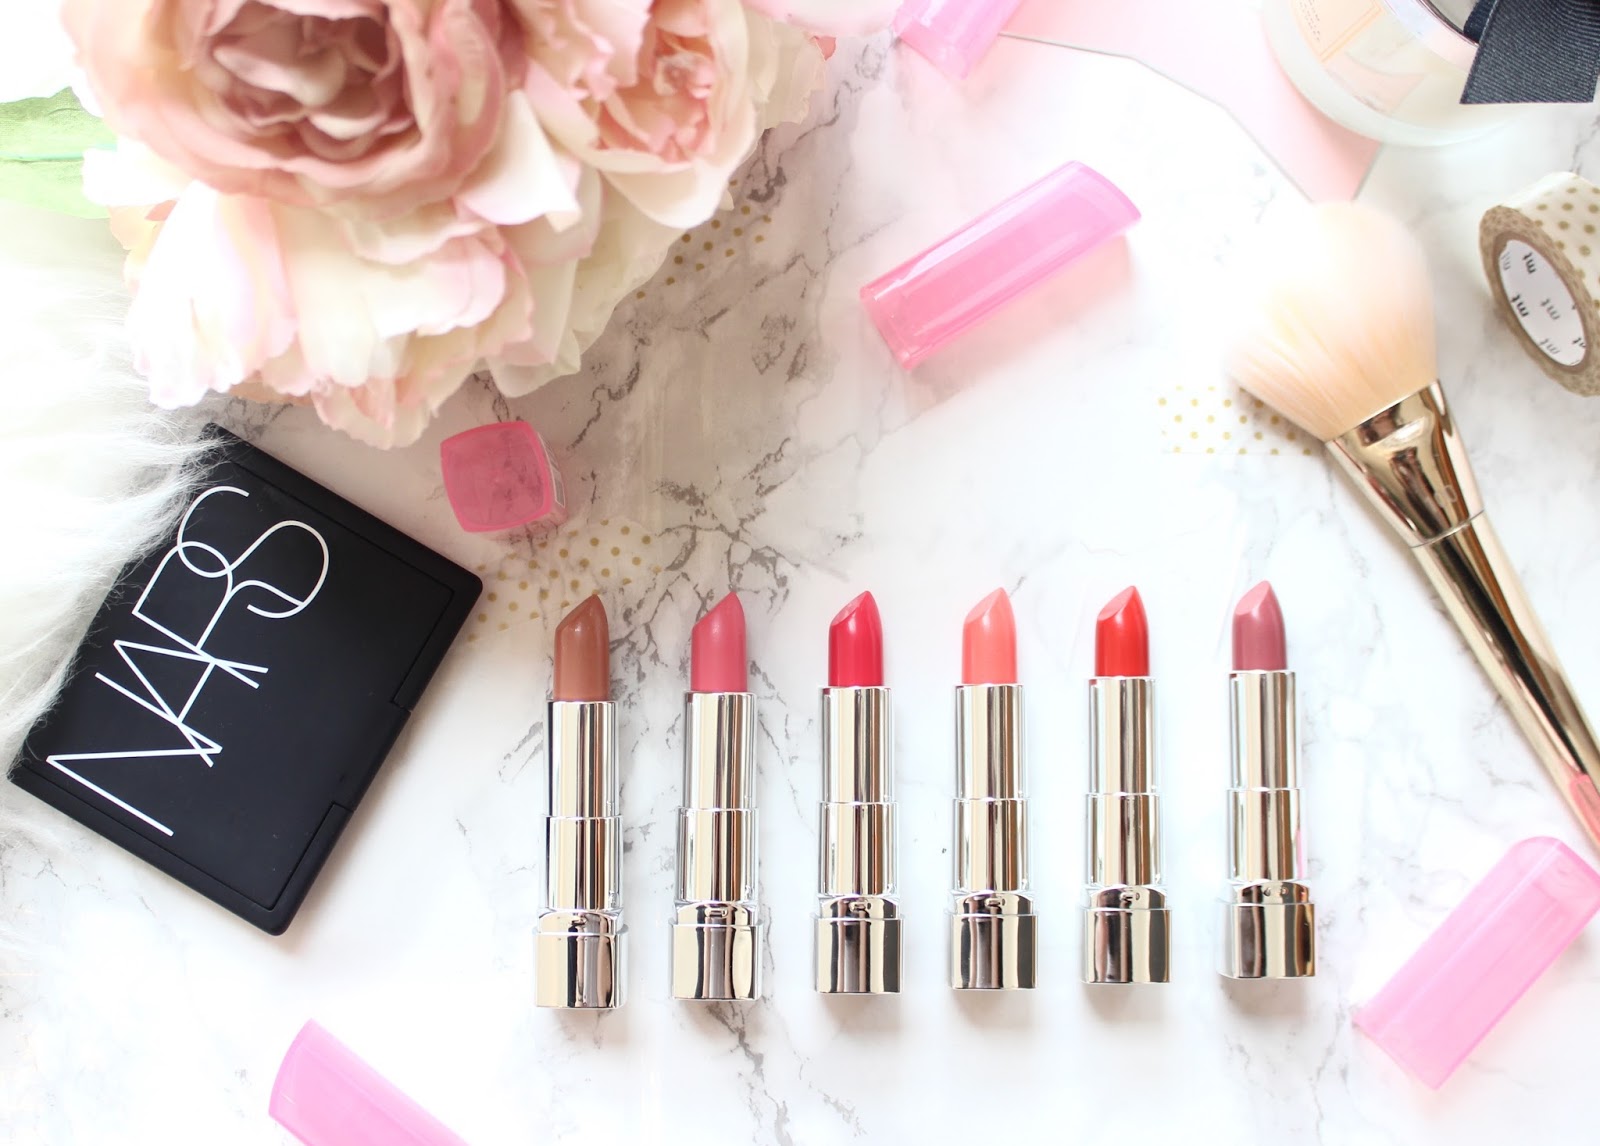 Manicurity: Rimmel London Moisture Renew Lipstick As You Want Victoria - Swatches & Review